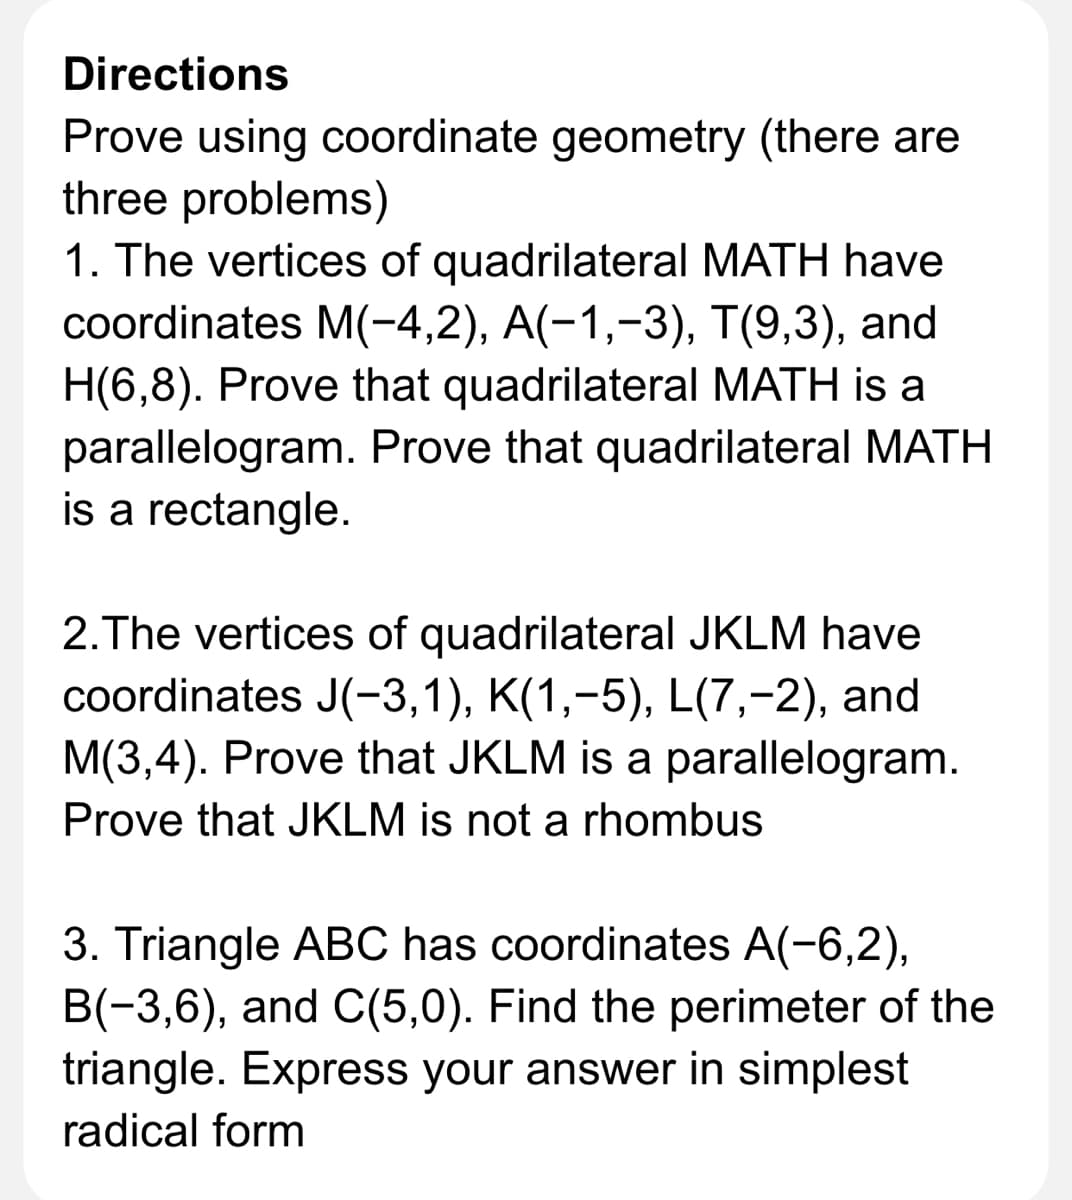 Directions
Prove using coordinate geometry (there are
three problems)
1. The vertices of quadrilateral MATH have
coordinates M(-4,2), A(-1,-3), T(9,3), and
H(6,8). Prove that quadrilateral MATH is a
parallelogram. Prove that quadrilateral MATH
is a rectangle.
2.The vertices of quadrilateral JKLM have
coordinates J(-3,1), K(1,-5), L(7,-2), and
M(3,4). Prove that JKLM is a parallelogram.
Prove that JKLM is not a rhombus
3. Triangle ABC has coordinates A(-6,2),
B(-3,6), and C(5,0). Find the perimeter of the
triangle. Express your answer in simplest
radical form
